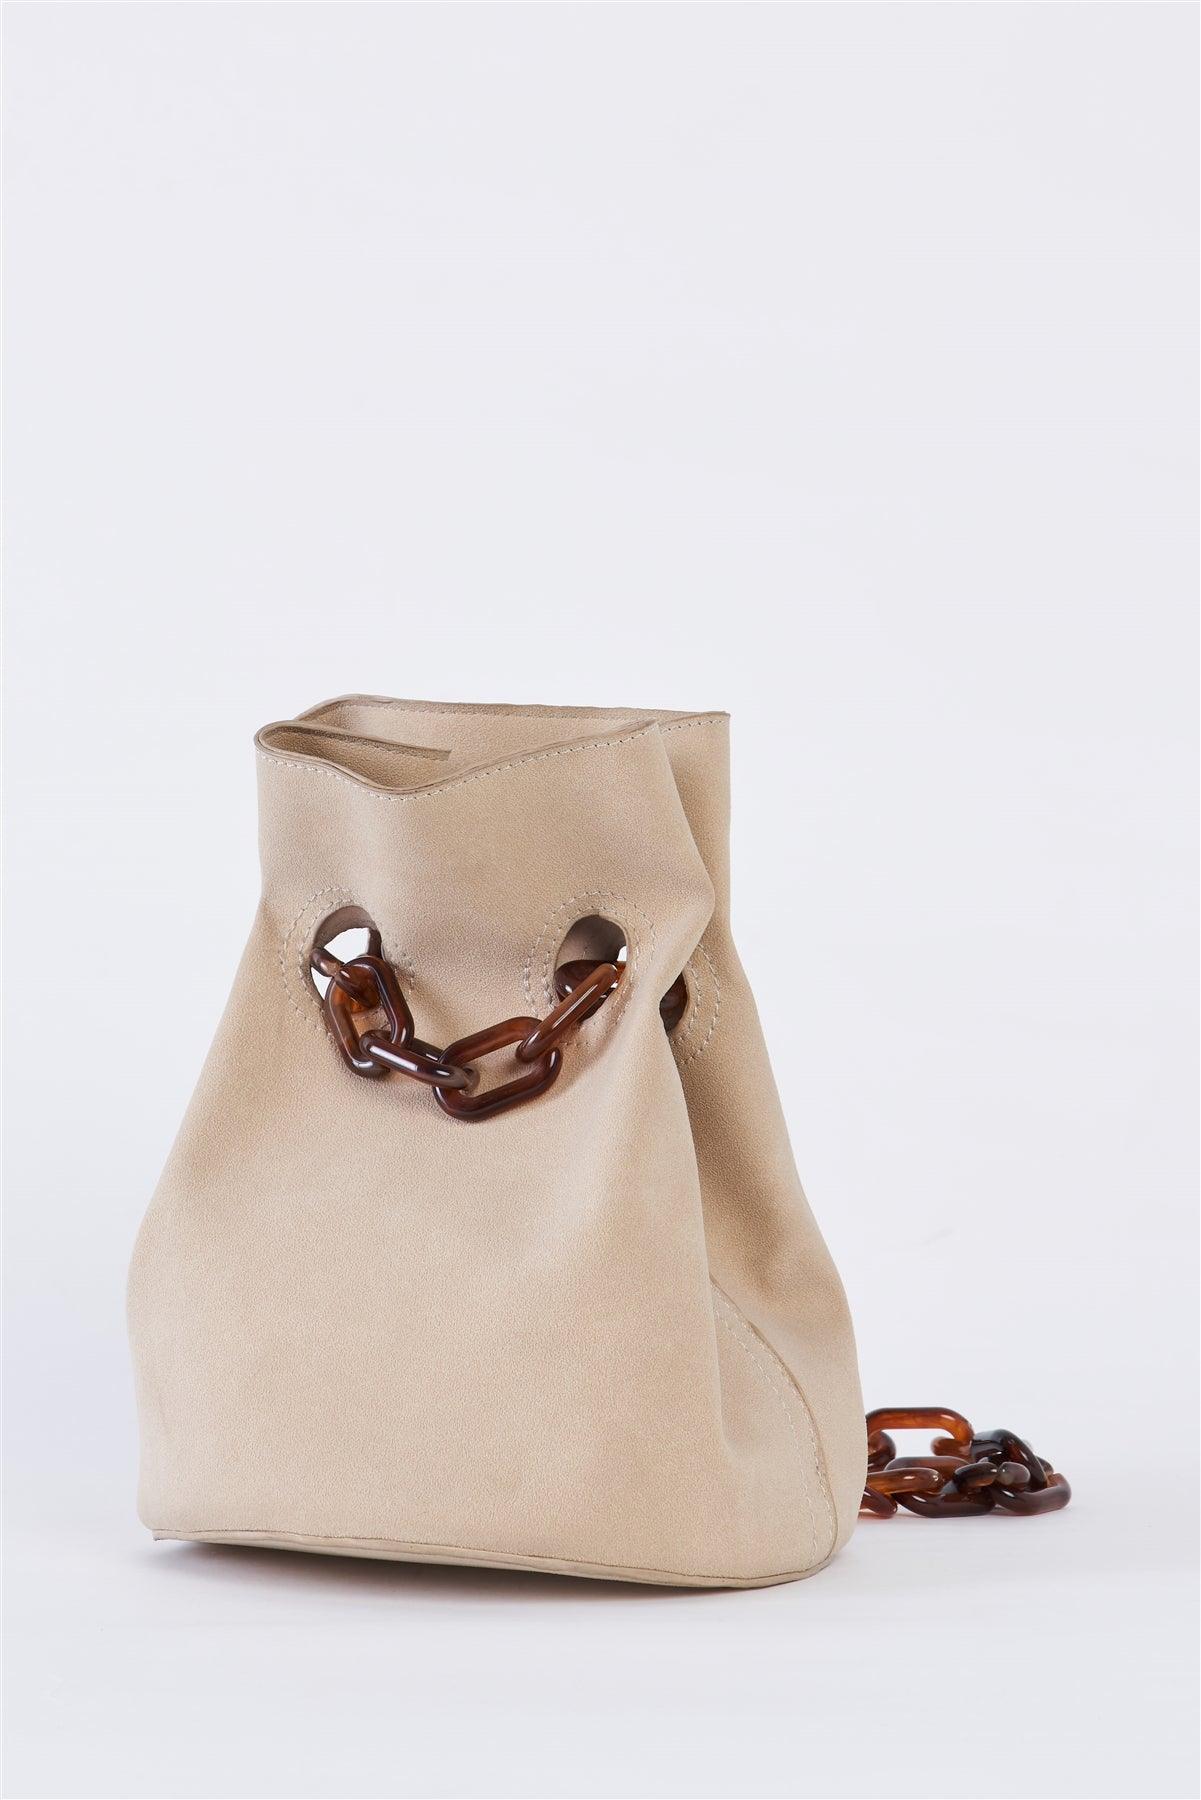 Ivory Suede Chain Handle Detail Fashion Bucket Bag /3 bags